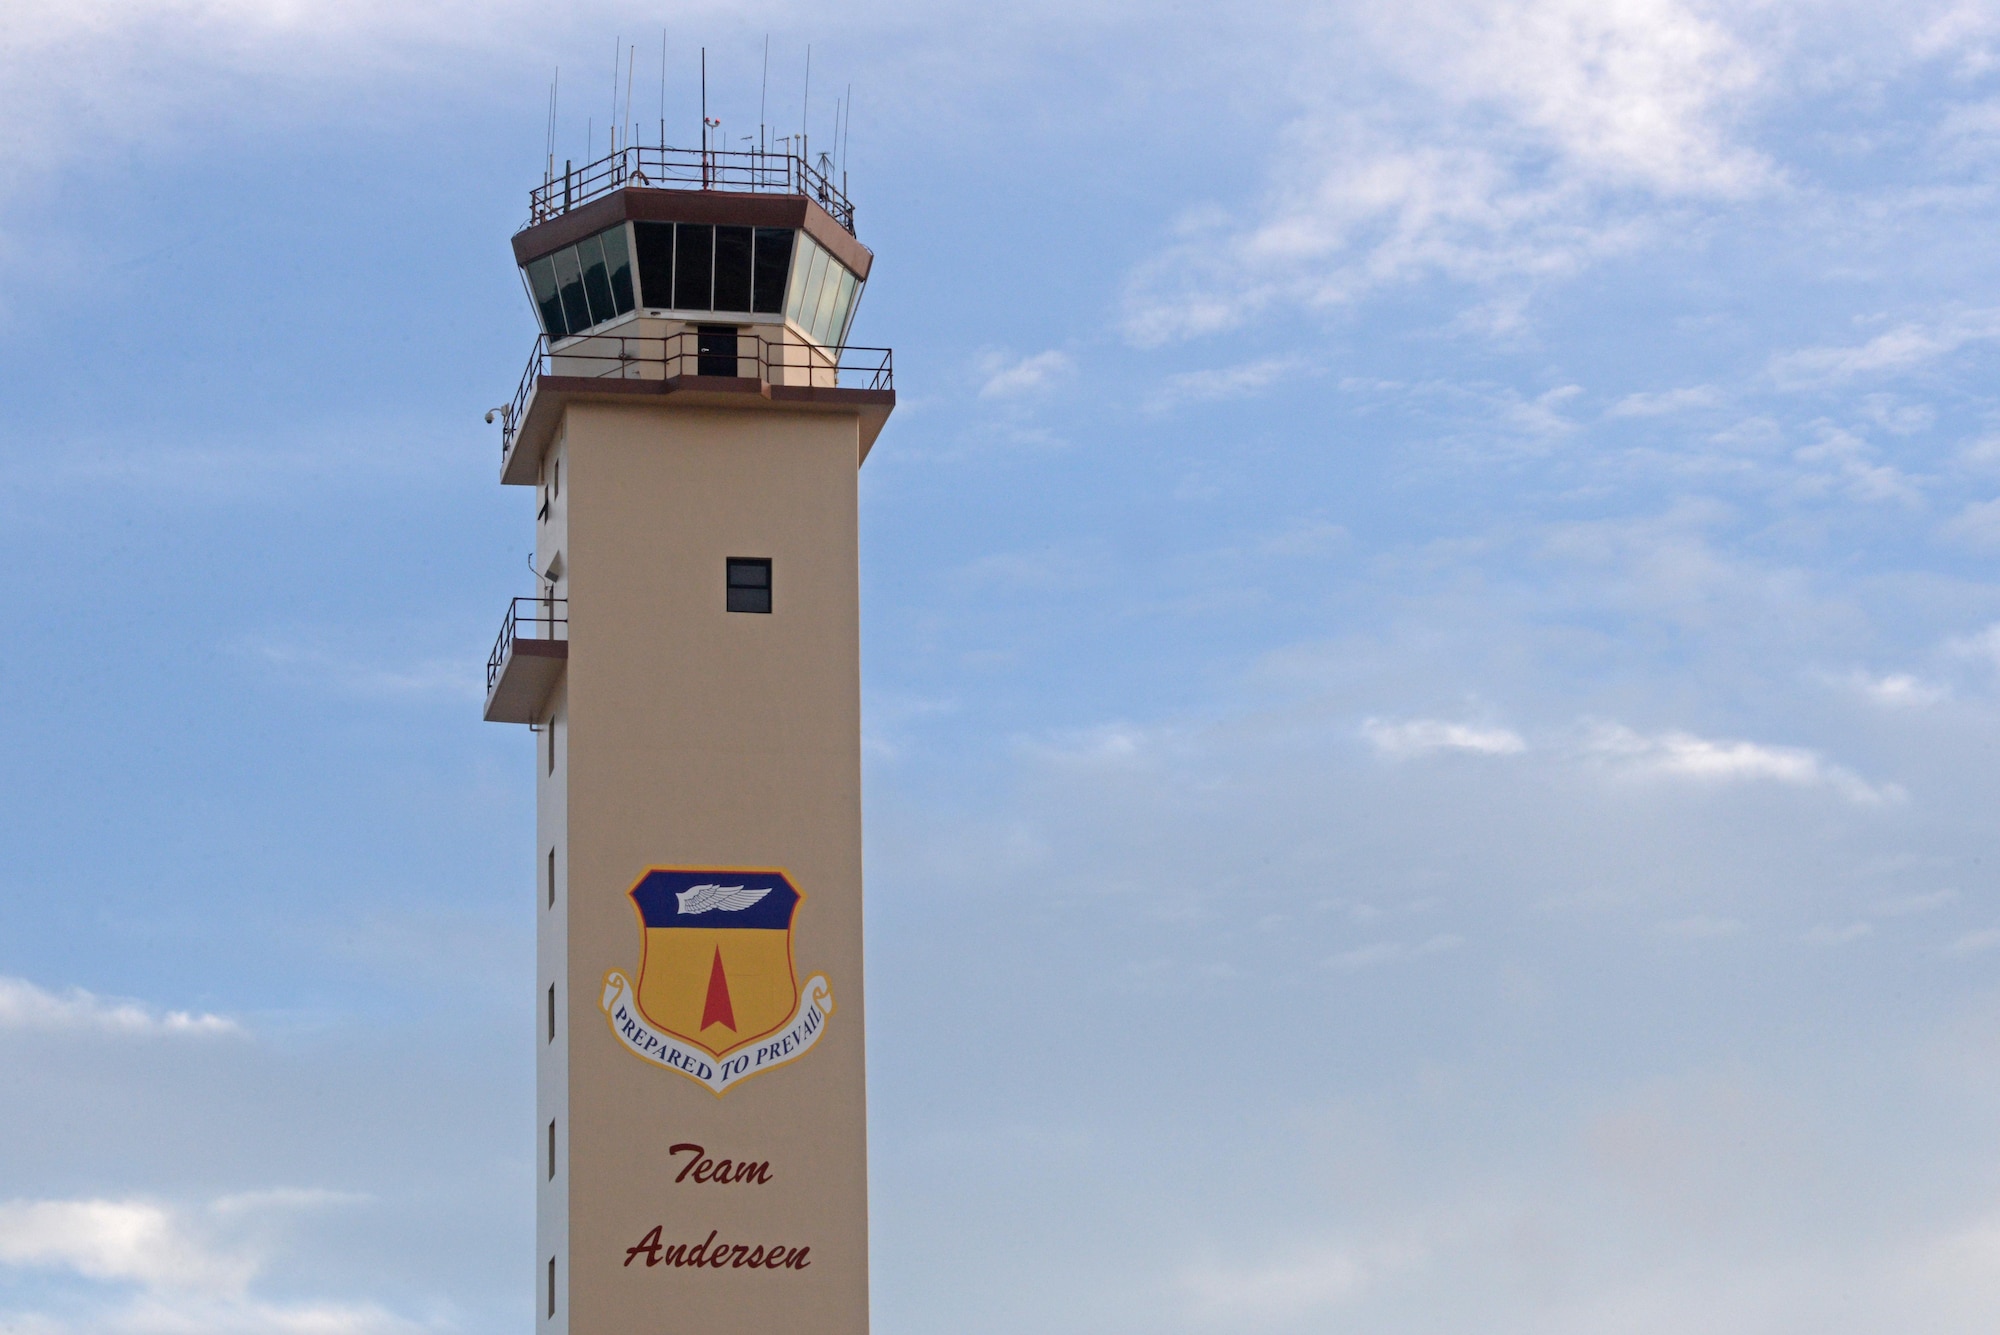 Andersen Air Force Base’s tower provides a 360 degree view of surrounding airspace. Air traffic controllers are responsible for managing the flow of aircraft through all aspects of their flight and ensuring the safety and efficiency of air traffic on the ground and in the air. (U.S. Air Force photo by Airman 1st Class Jacob Skovo)